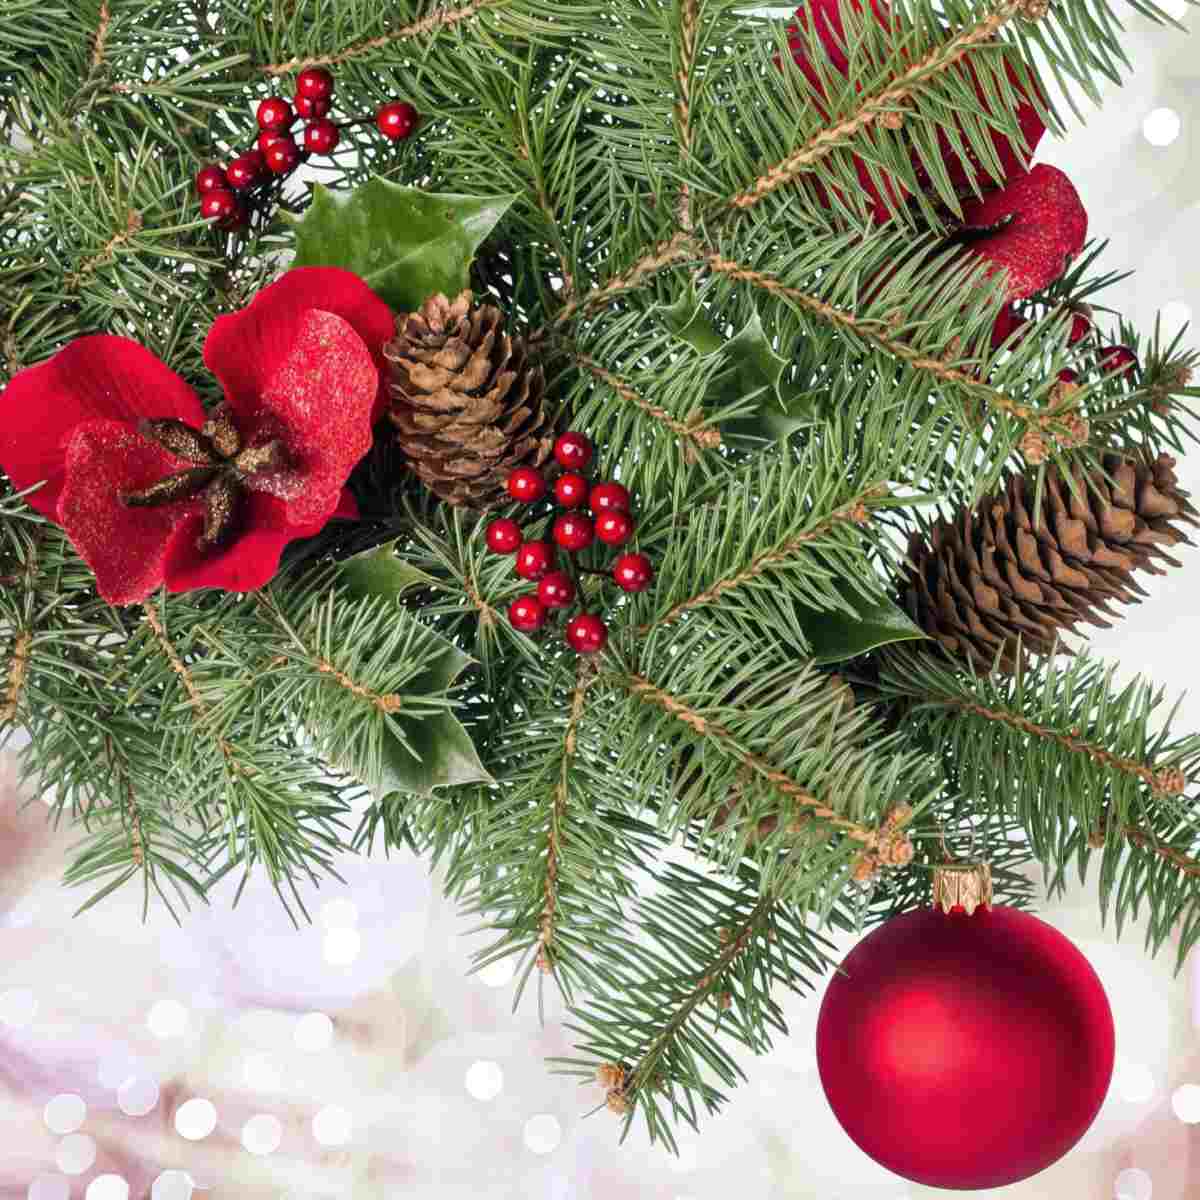 A pine bough with berries, pinecones, poinsettias and a red Christmas ornament nestled into it against a white glittery background.